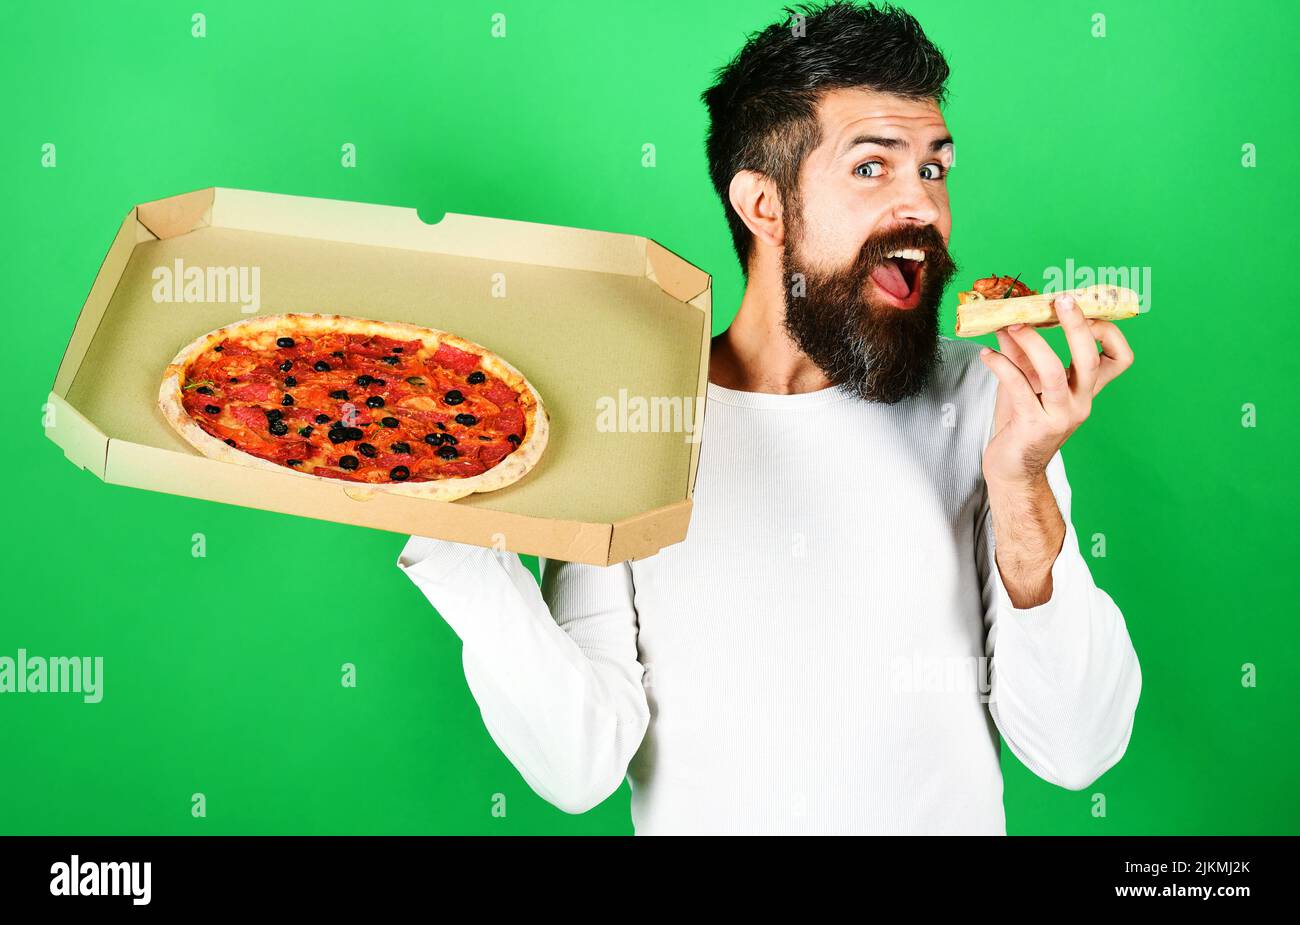 Hungry man eating slice tasty pizza. Food delivery home. Man with beard enjoying delicious pizza Stock Photo